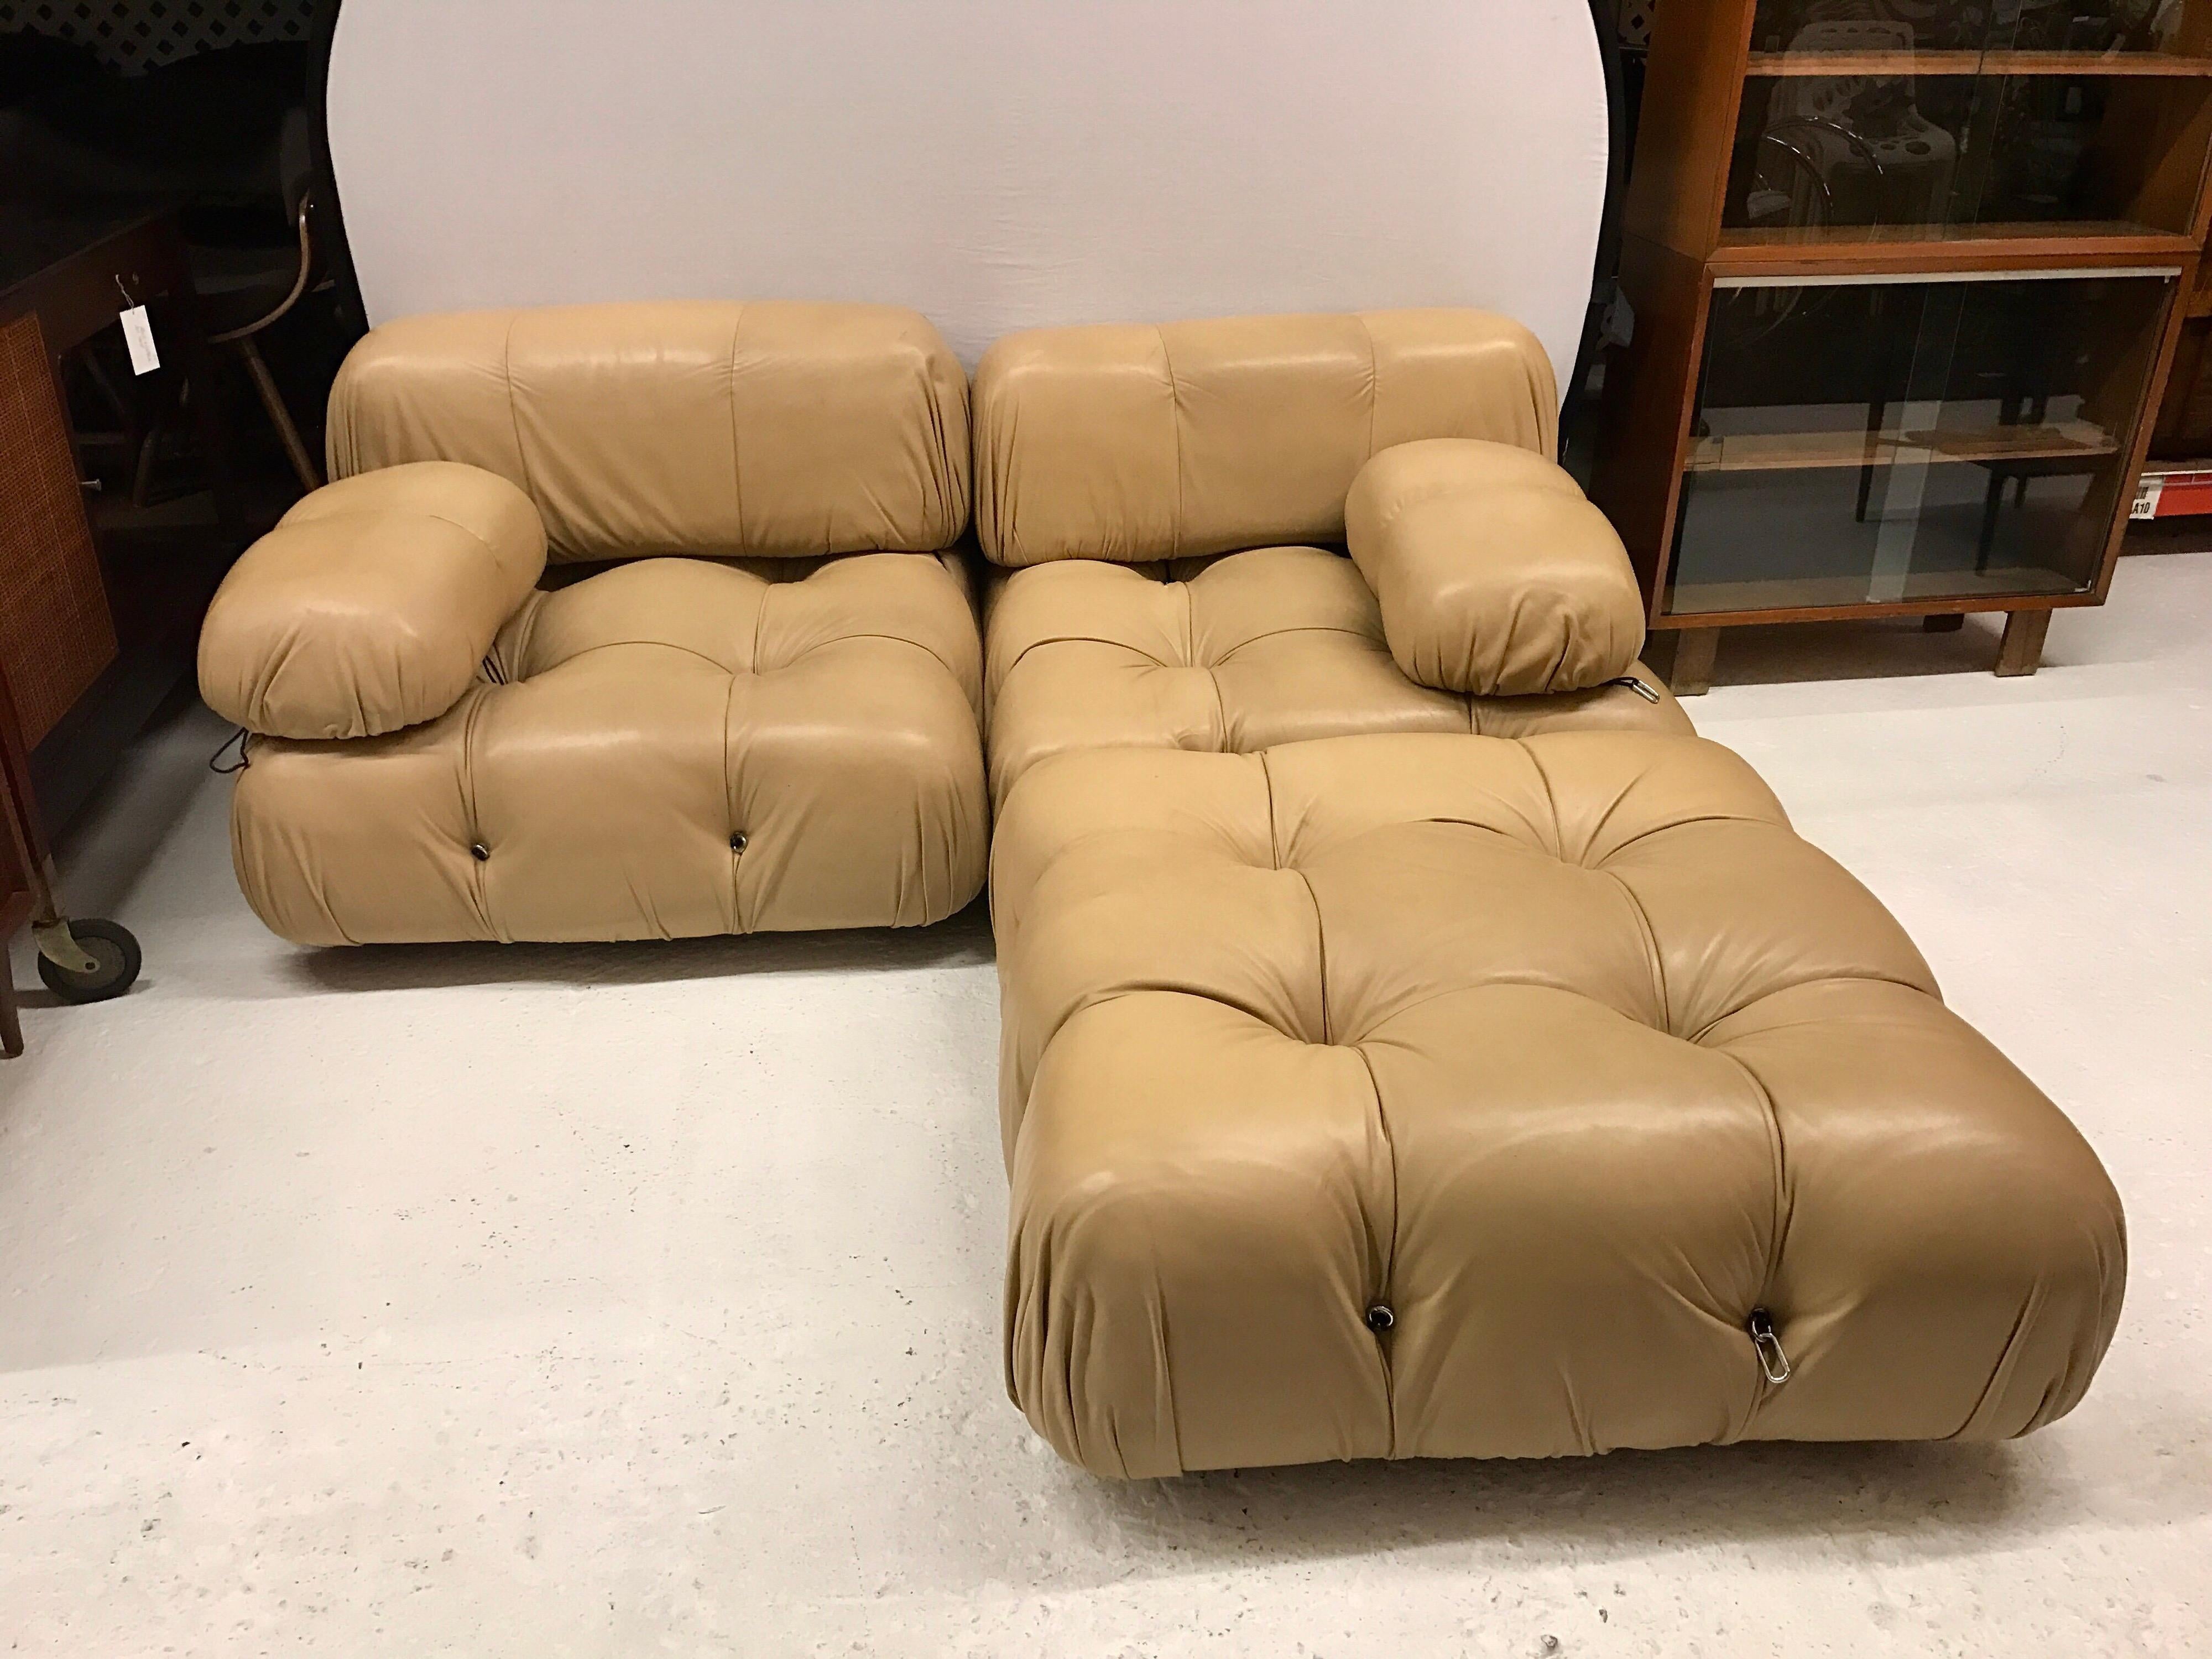 Sought after Mario Bellini, large modular Cameleonda sofa, rare solid beige leather upholstery, circa early 1970s, Italy with all manufacturer and designer hallmarks. The leather is nothing short of gorgeous.

The sectional elements this sofa was